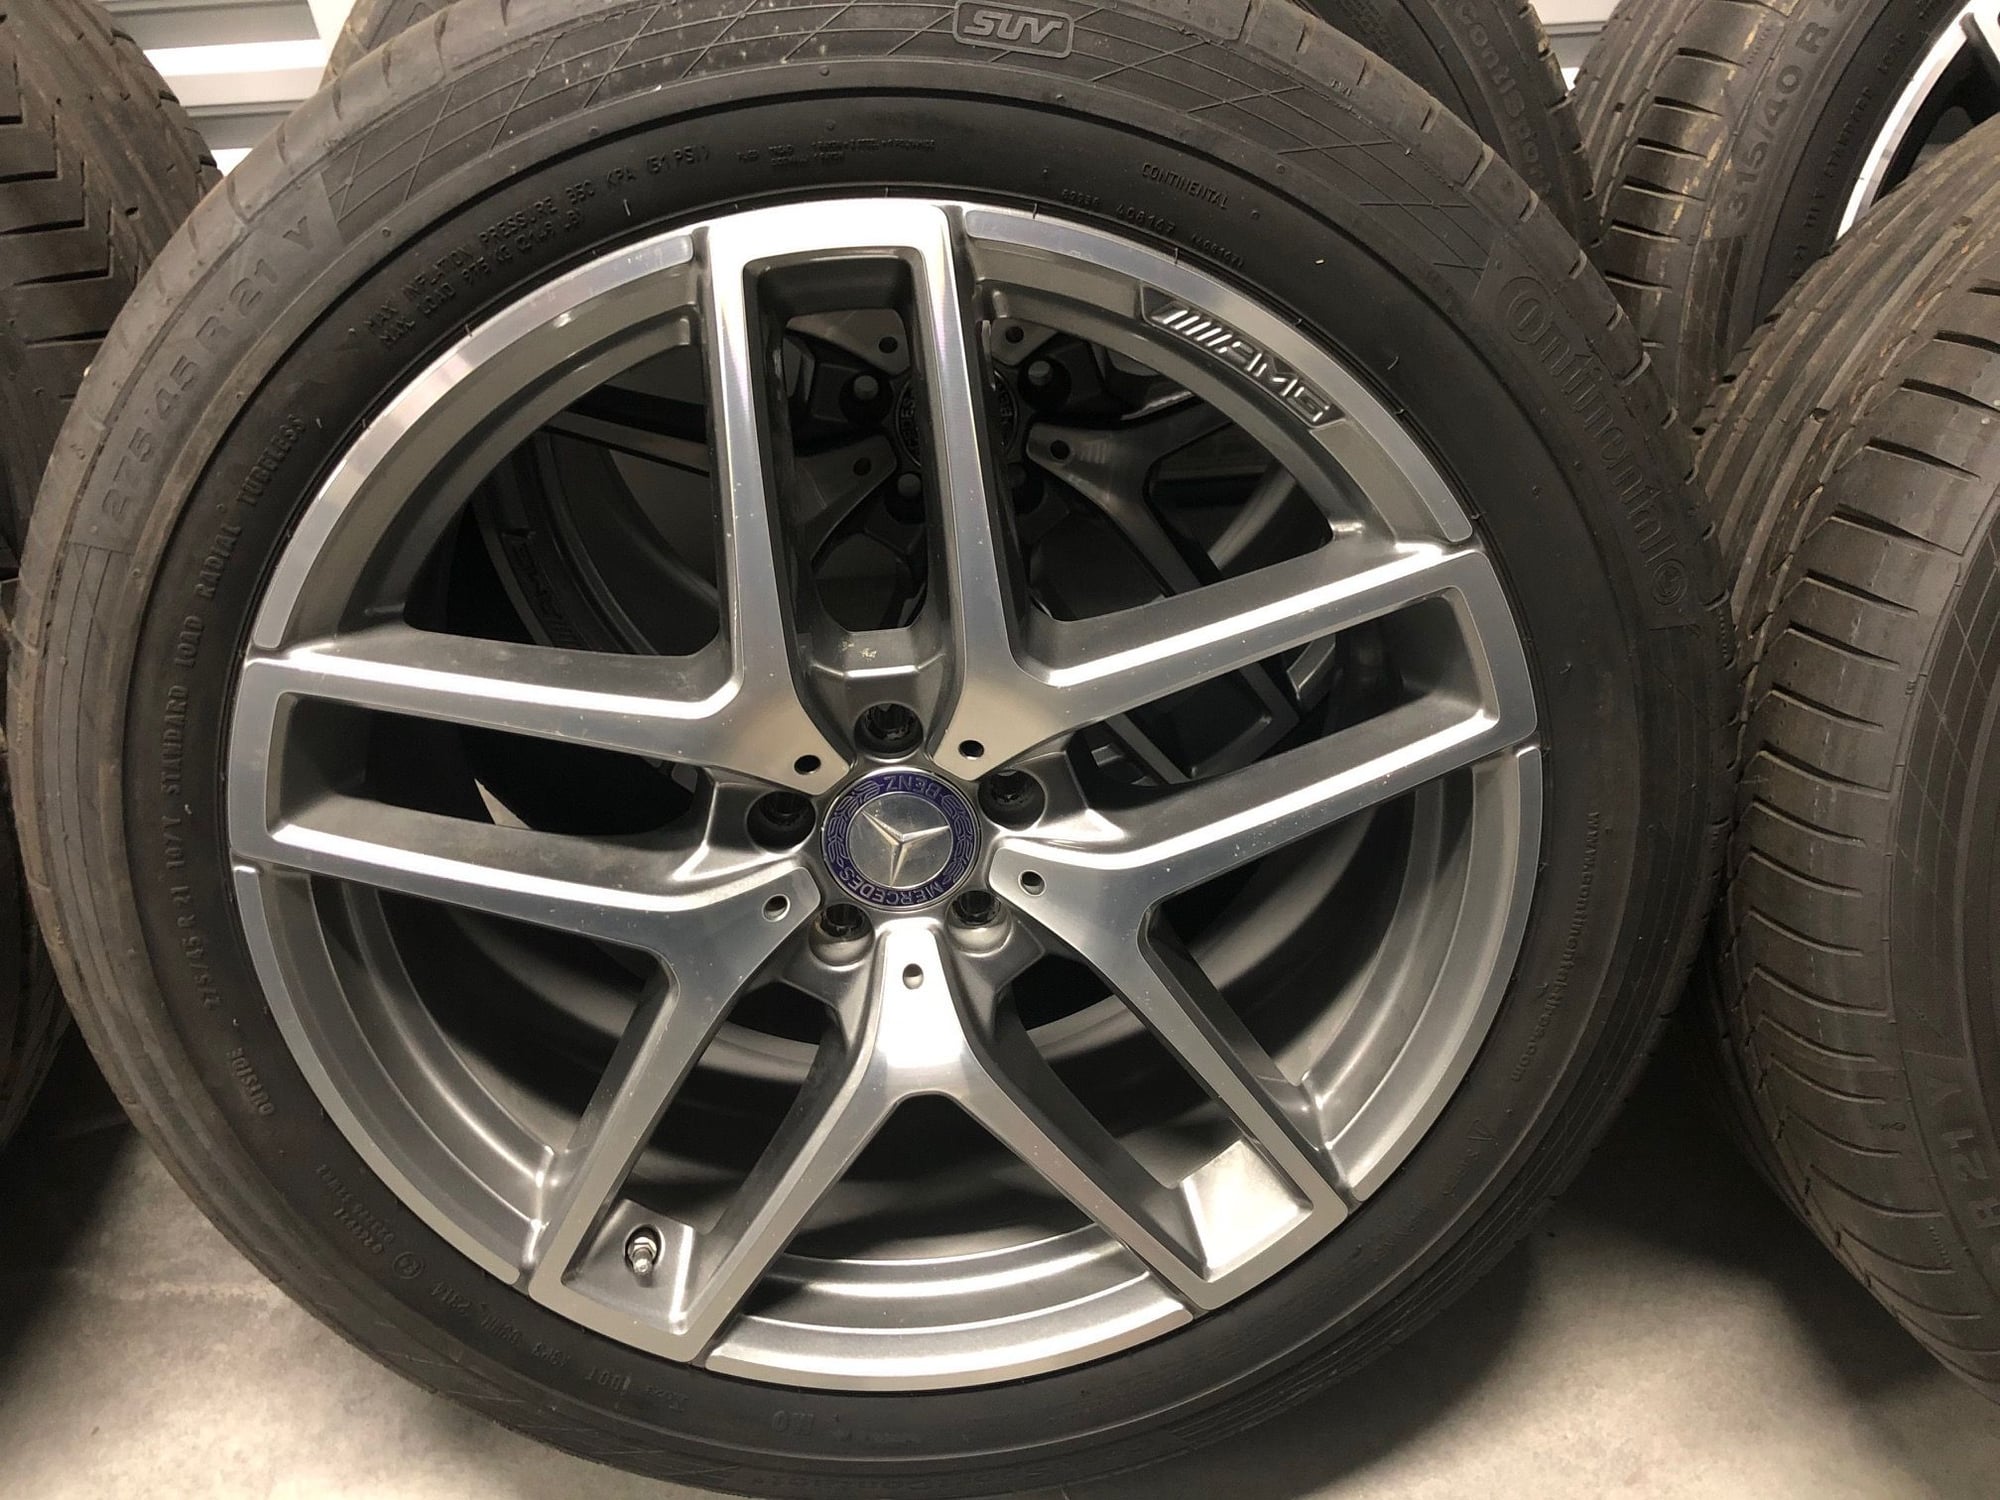 Wheels and Tires/Axles - 21" Mercedes Benz Wheels and tires with TPMS from a 2019 GLS63 - New - 2012 to 2020 Mercedes-Benz GLE43 AMG - Summit, NJ 07902, United States